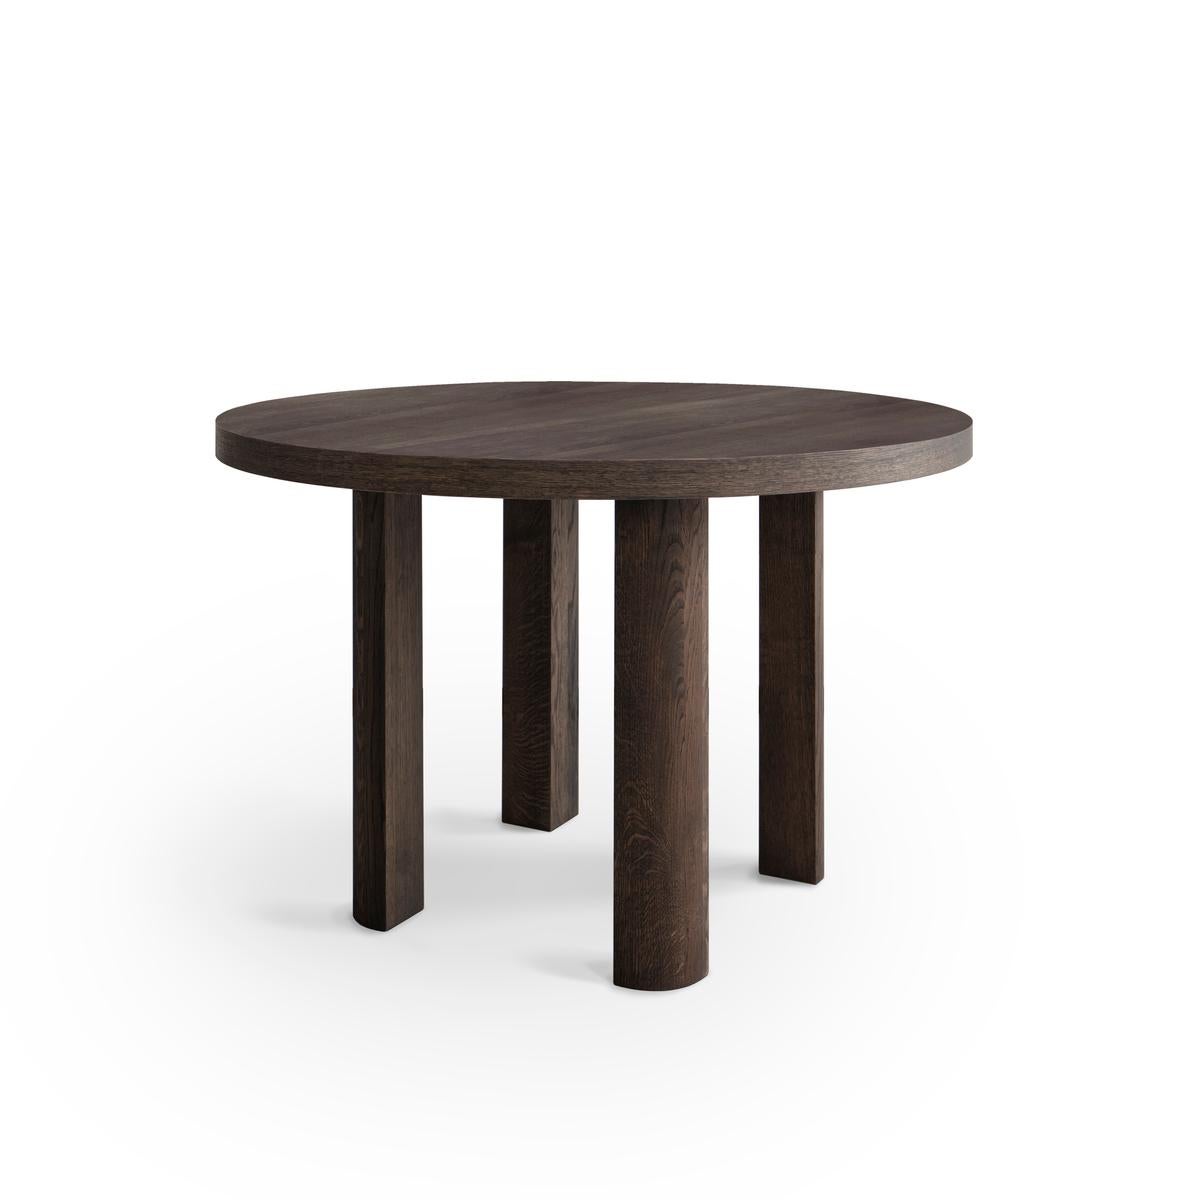 'QUARTER' Round table
Designed by IDA L. HILDEBRAND

Dimensions: DIA. 120 cm / H. 75 cm / Top thickness 5 cm
Model in the picture : Smoked Oak - tabletop veneer 

FRIENDS FOUNDERS create contemporary designs with strong focuses on